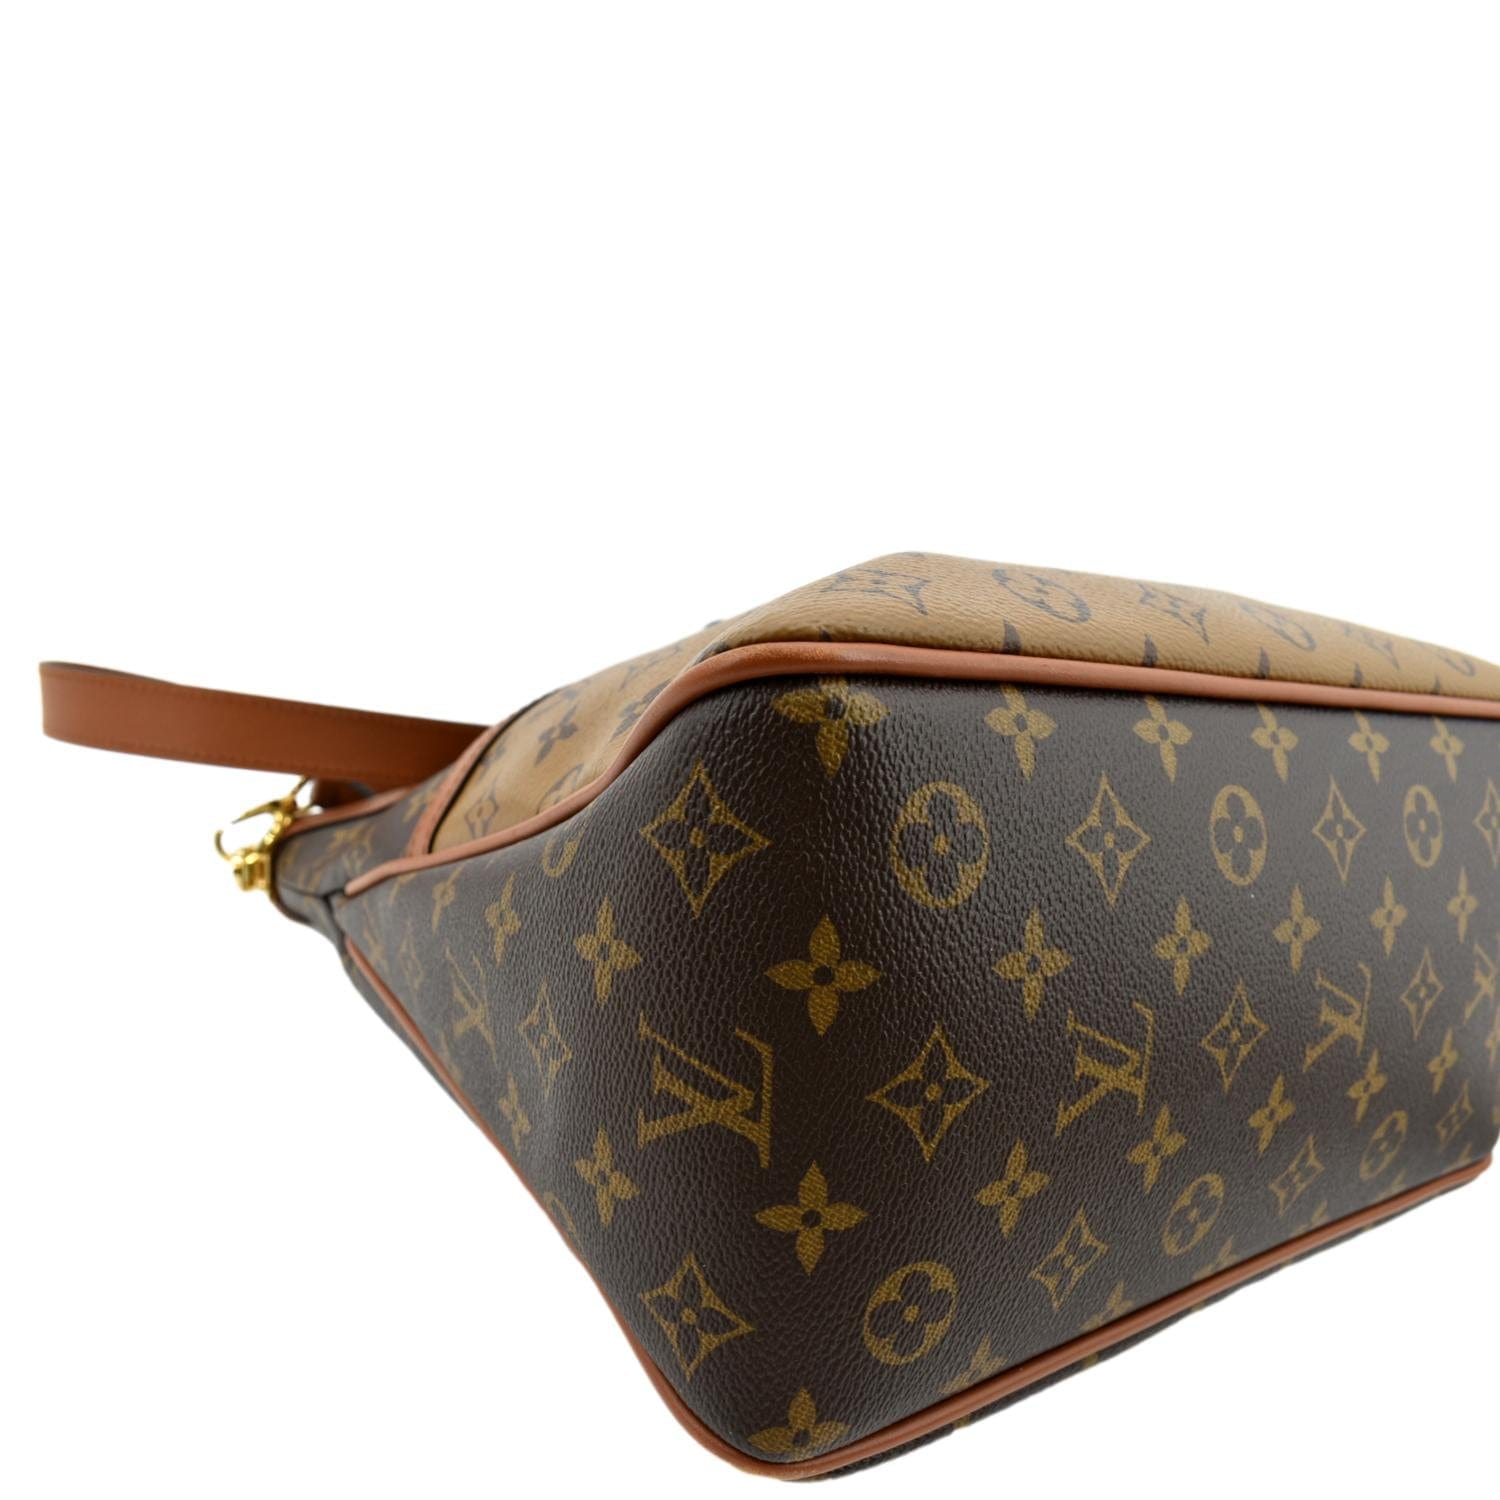 Only 1206.40 usd for Louis Vuitton Bag, Monogram Canvas Dauphine